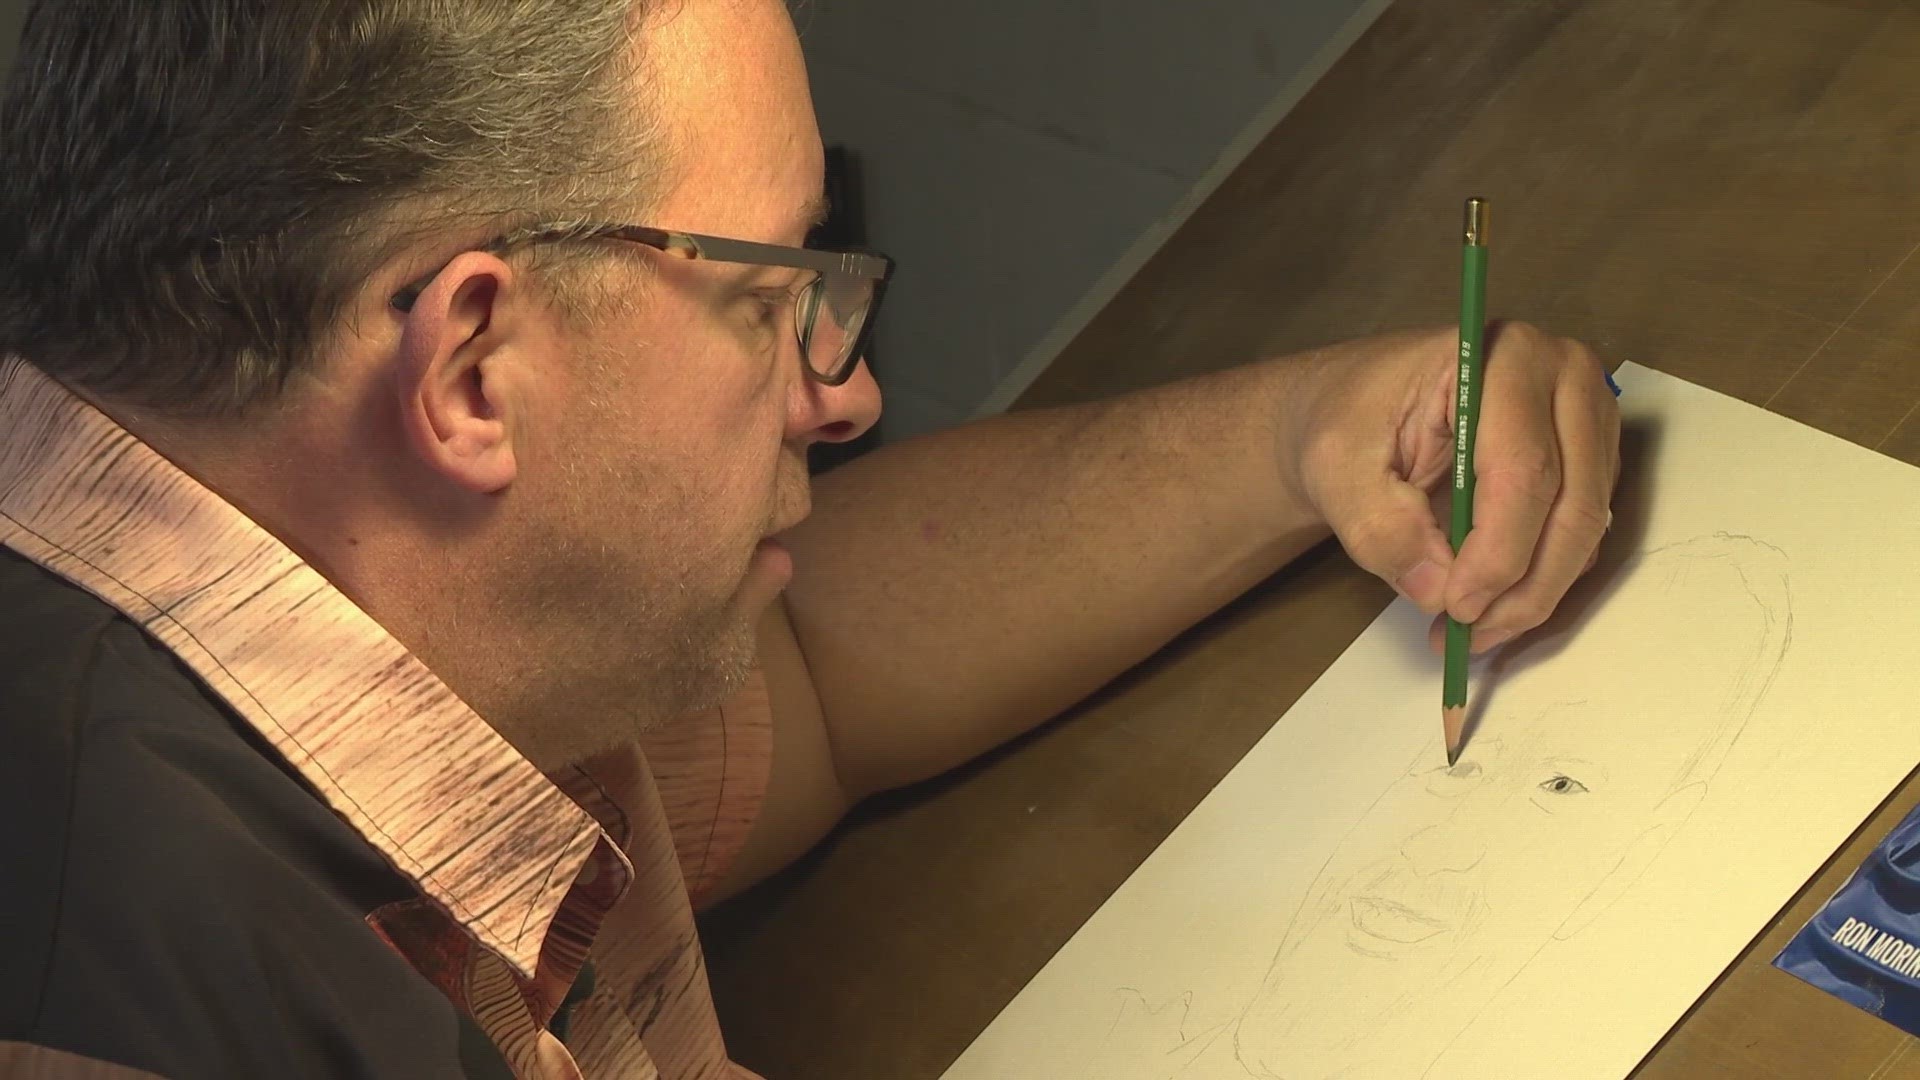 One artist in Mahoning County is crafting portraits to commemorate the lives lost in the Maine mass shooting. He's hoping it will help heal the families.